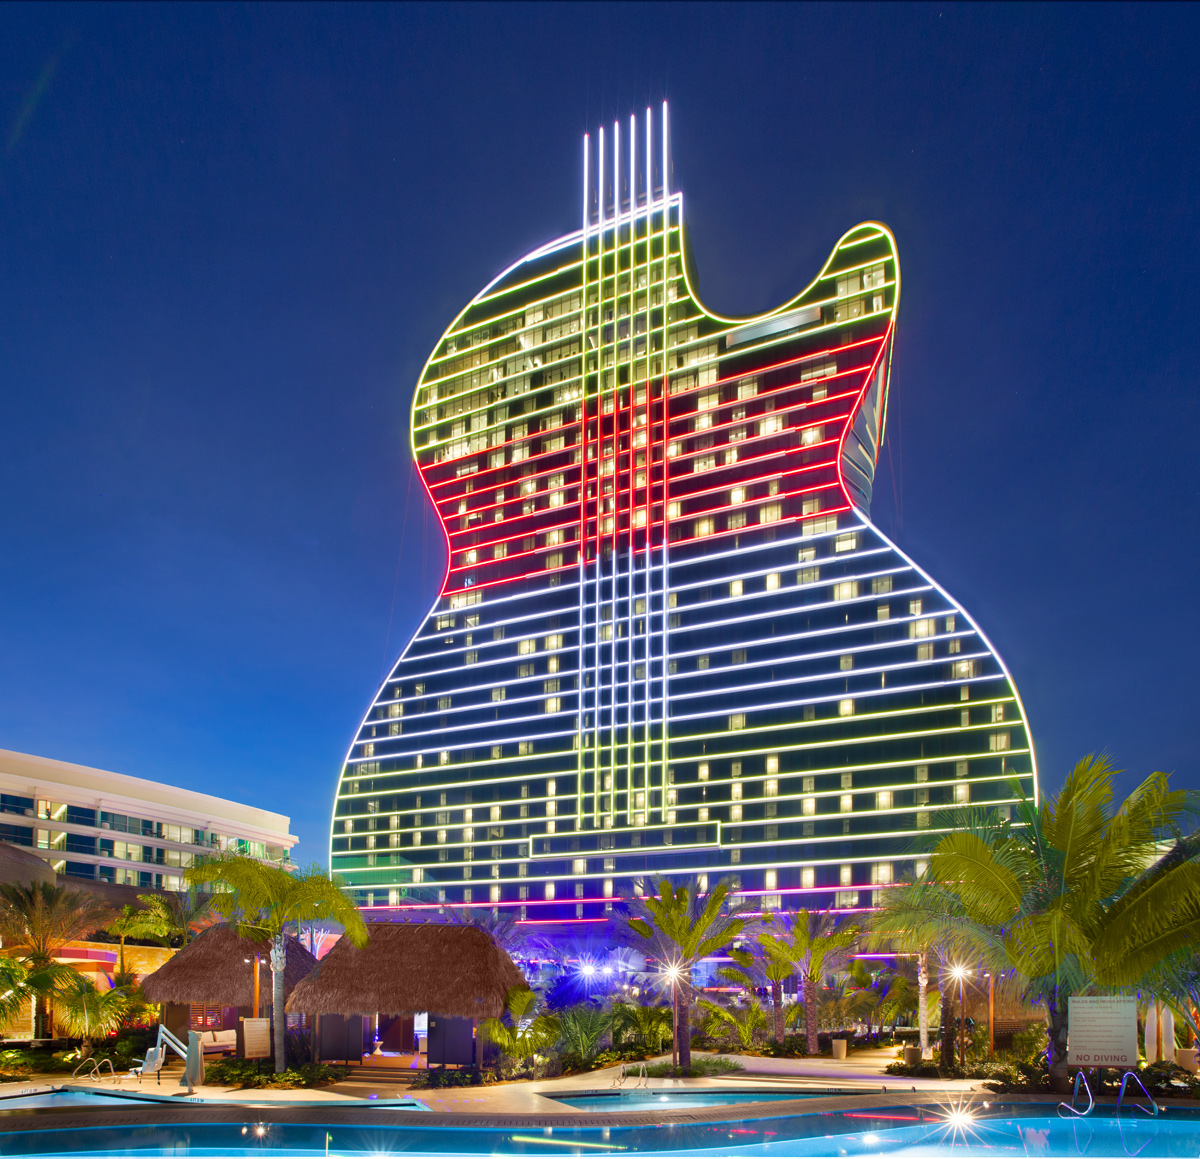 Architectural dusk view of the Hard Rock Hollywood guitar hotel.